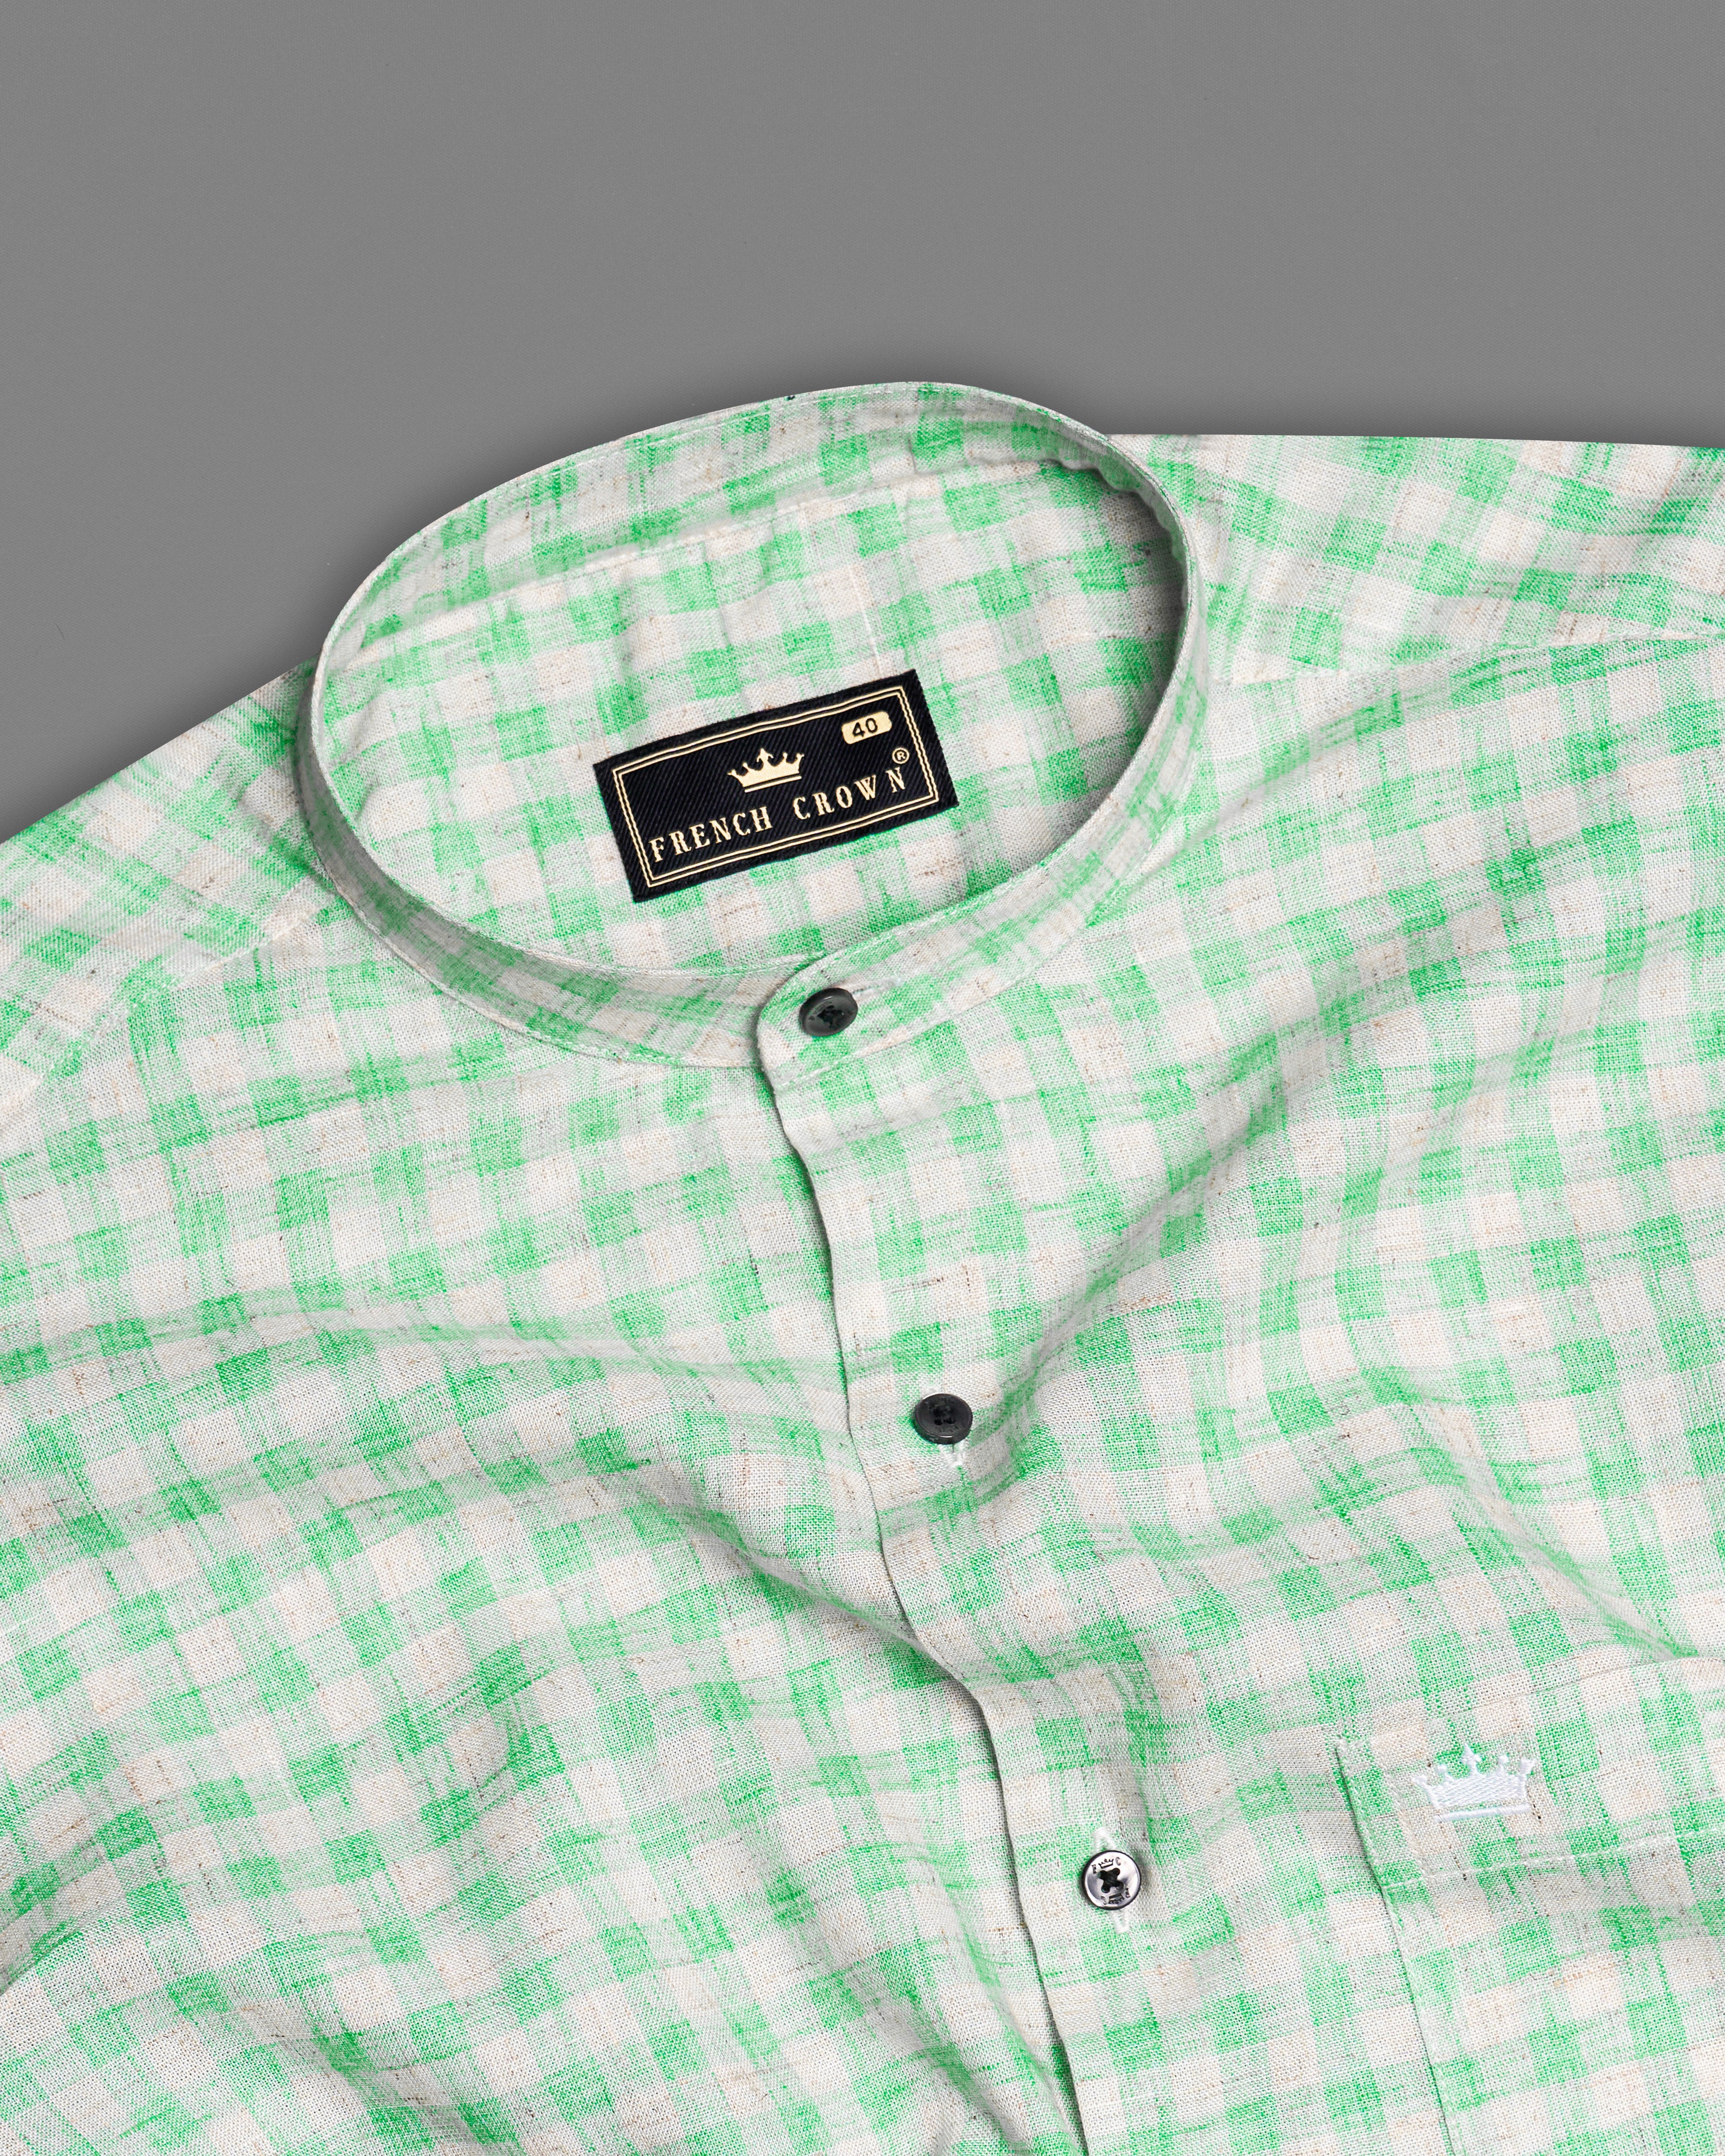 Turquoise Green with Mercury Gray Checkered Luxurious Linen Half Slavees Shirt 9644-M-BLK-SS-H-38, 9644-M-BLK-SS-H-39, 9644-M-BLK-SS-H-40, 9644-M-BLK-SS-H-42, 9644-M-BLK-SS-H-44, 9644-M-BLK-SS-H-46, 9644-M-BLK-SS-H-48, 9644-M-BLK-SS-H-50, 9644-M-BLK-SS-H-52